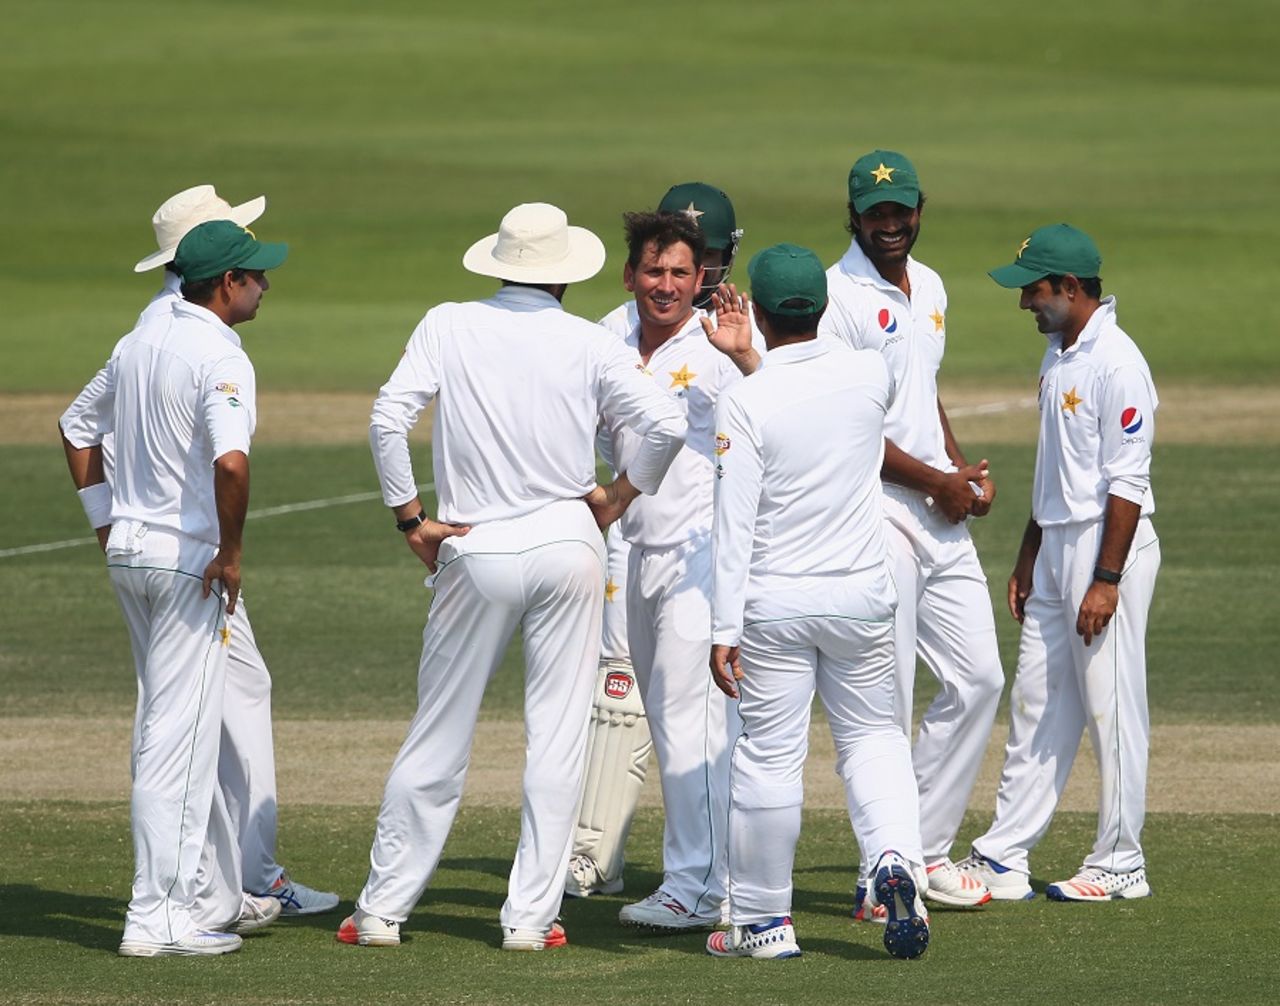 Yasir Shah dismissed last man Shannon Gabriel to finish with 4 for 86 , Pakistan v West Indies, 2nd Test, Abu Dhabi, 3rd day, October 23, 2016